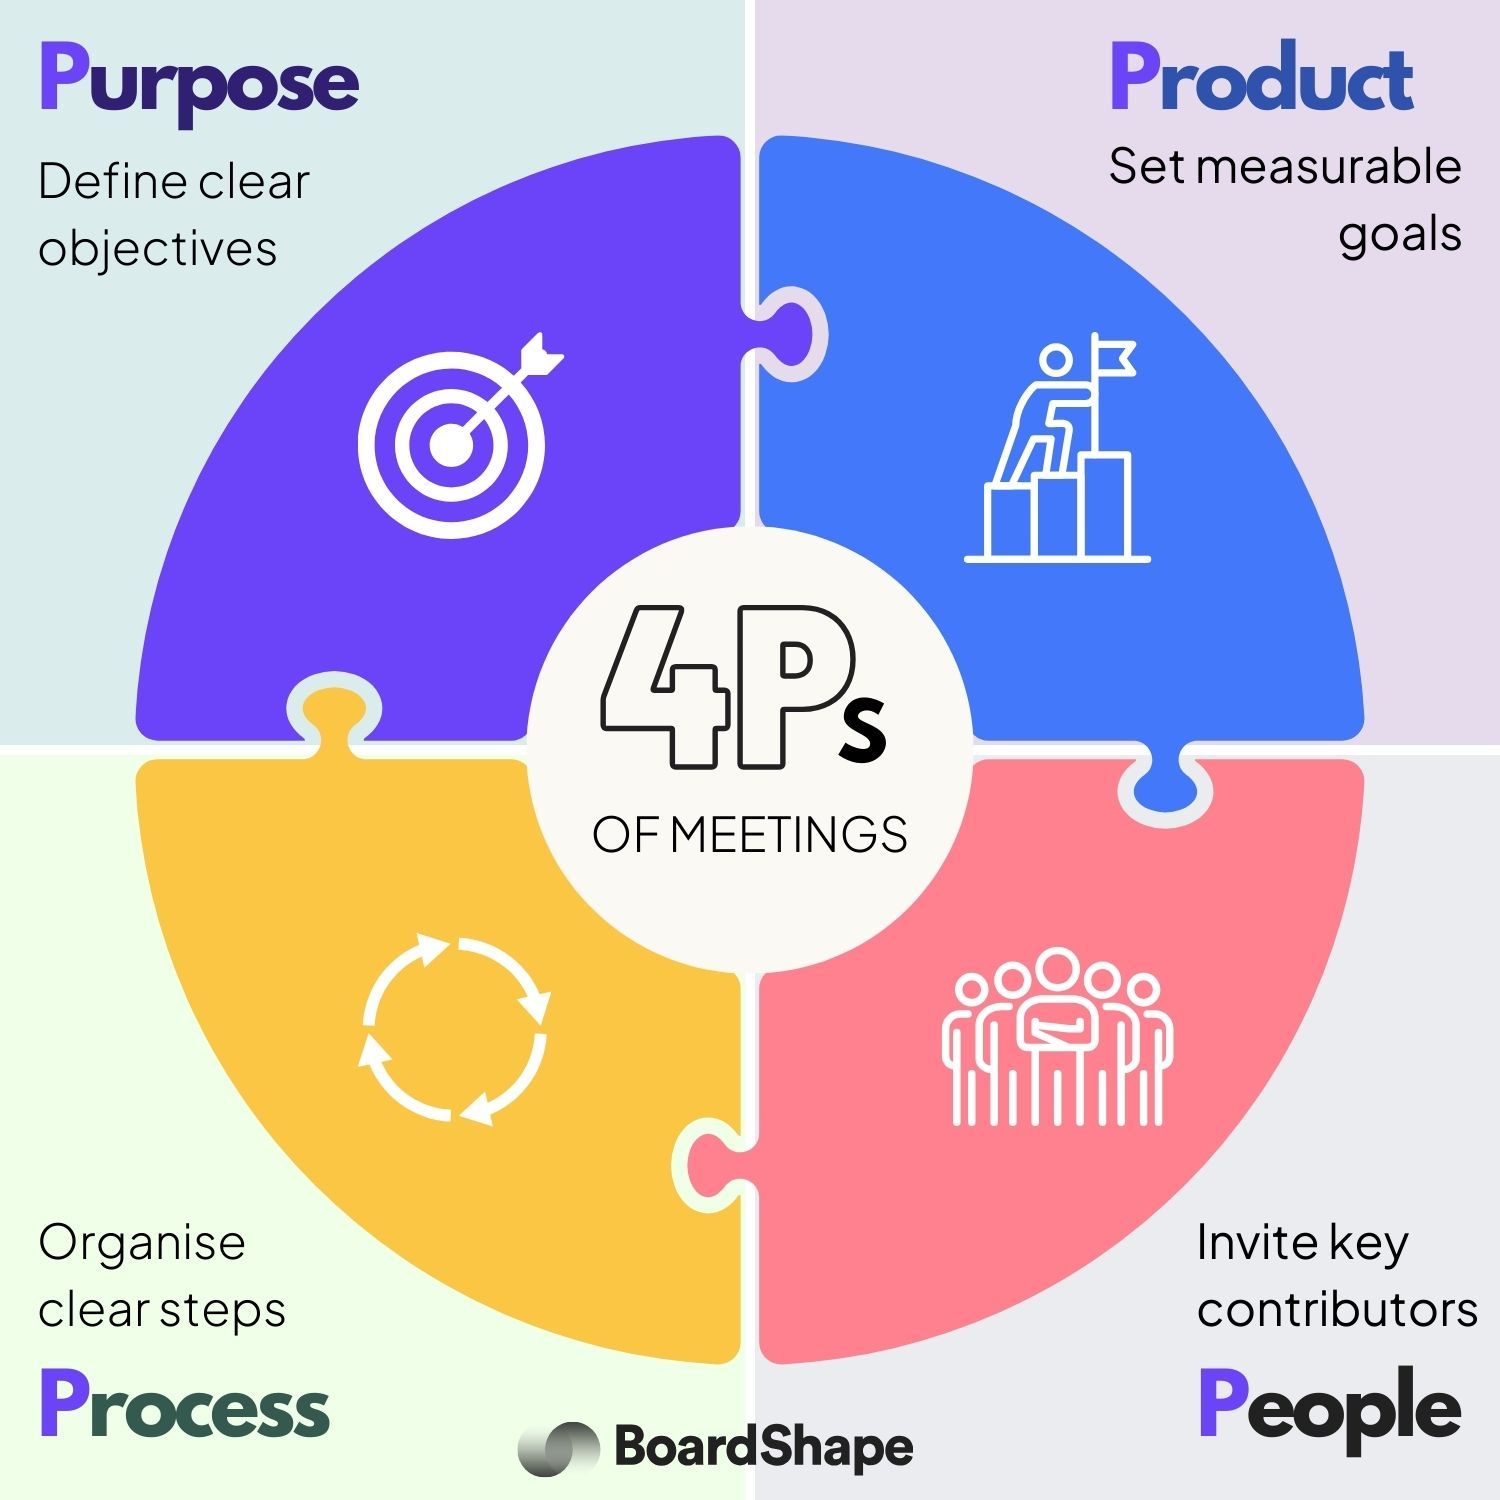 Infographic showing the 4 p's of meetings.